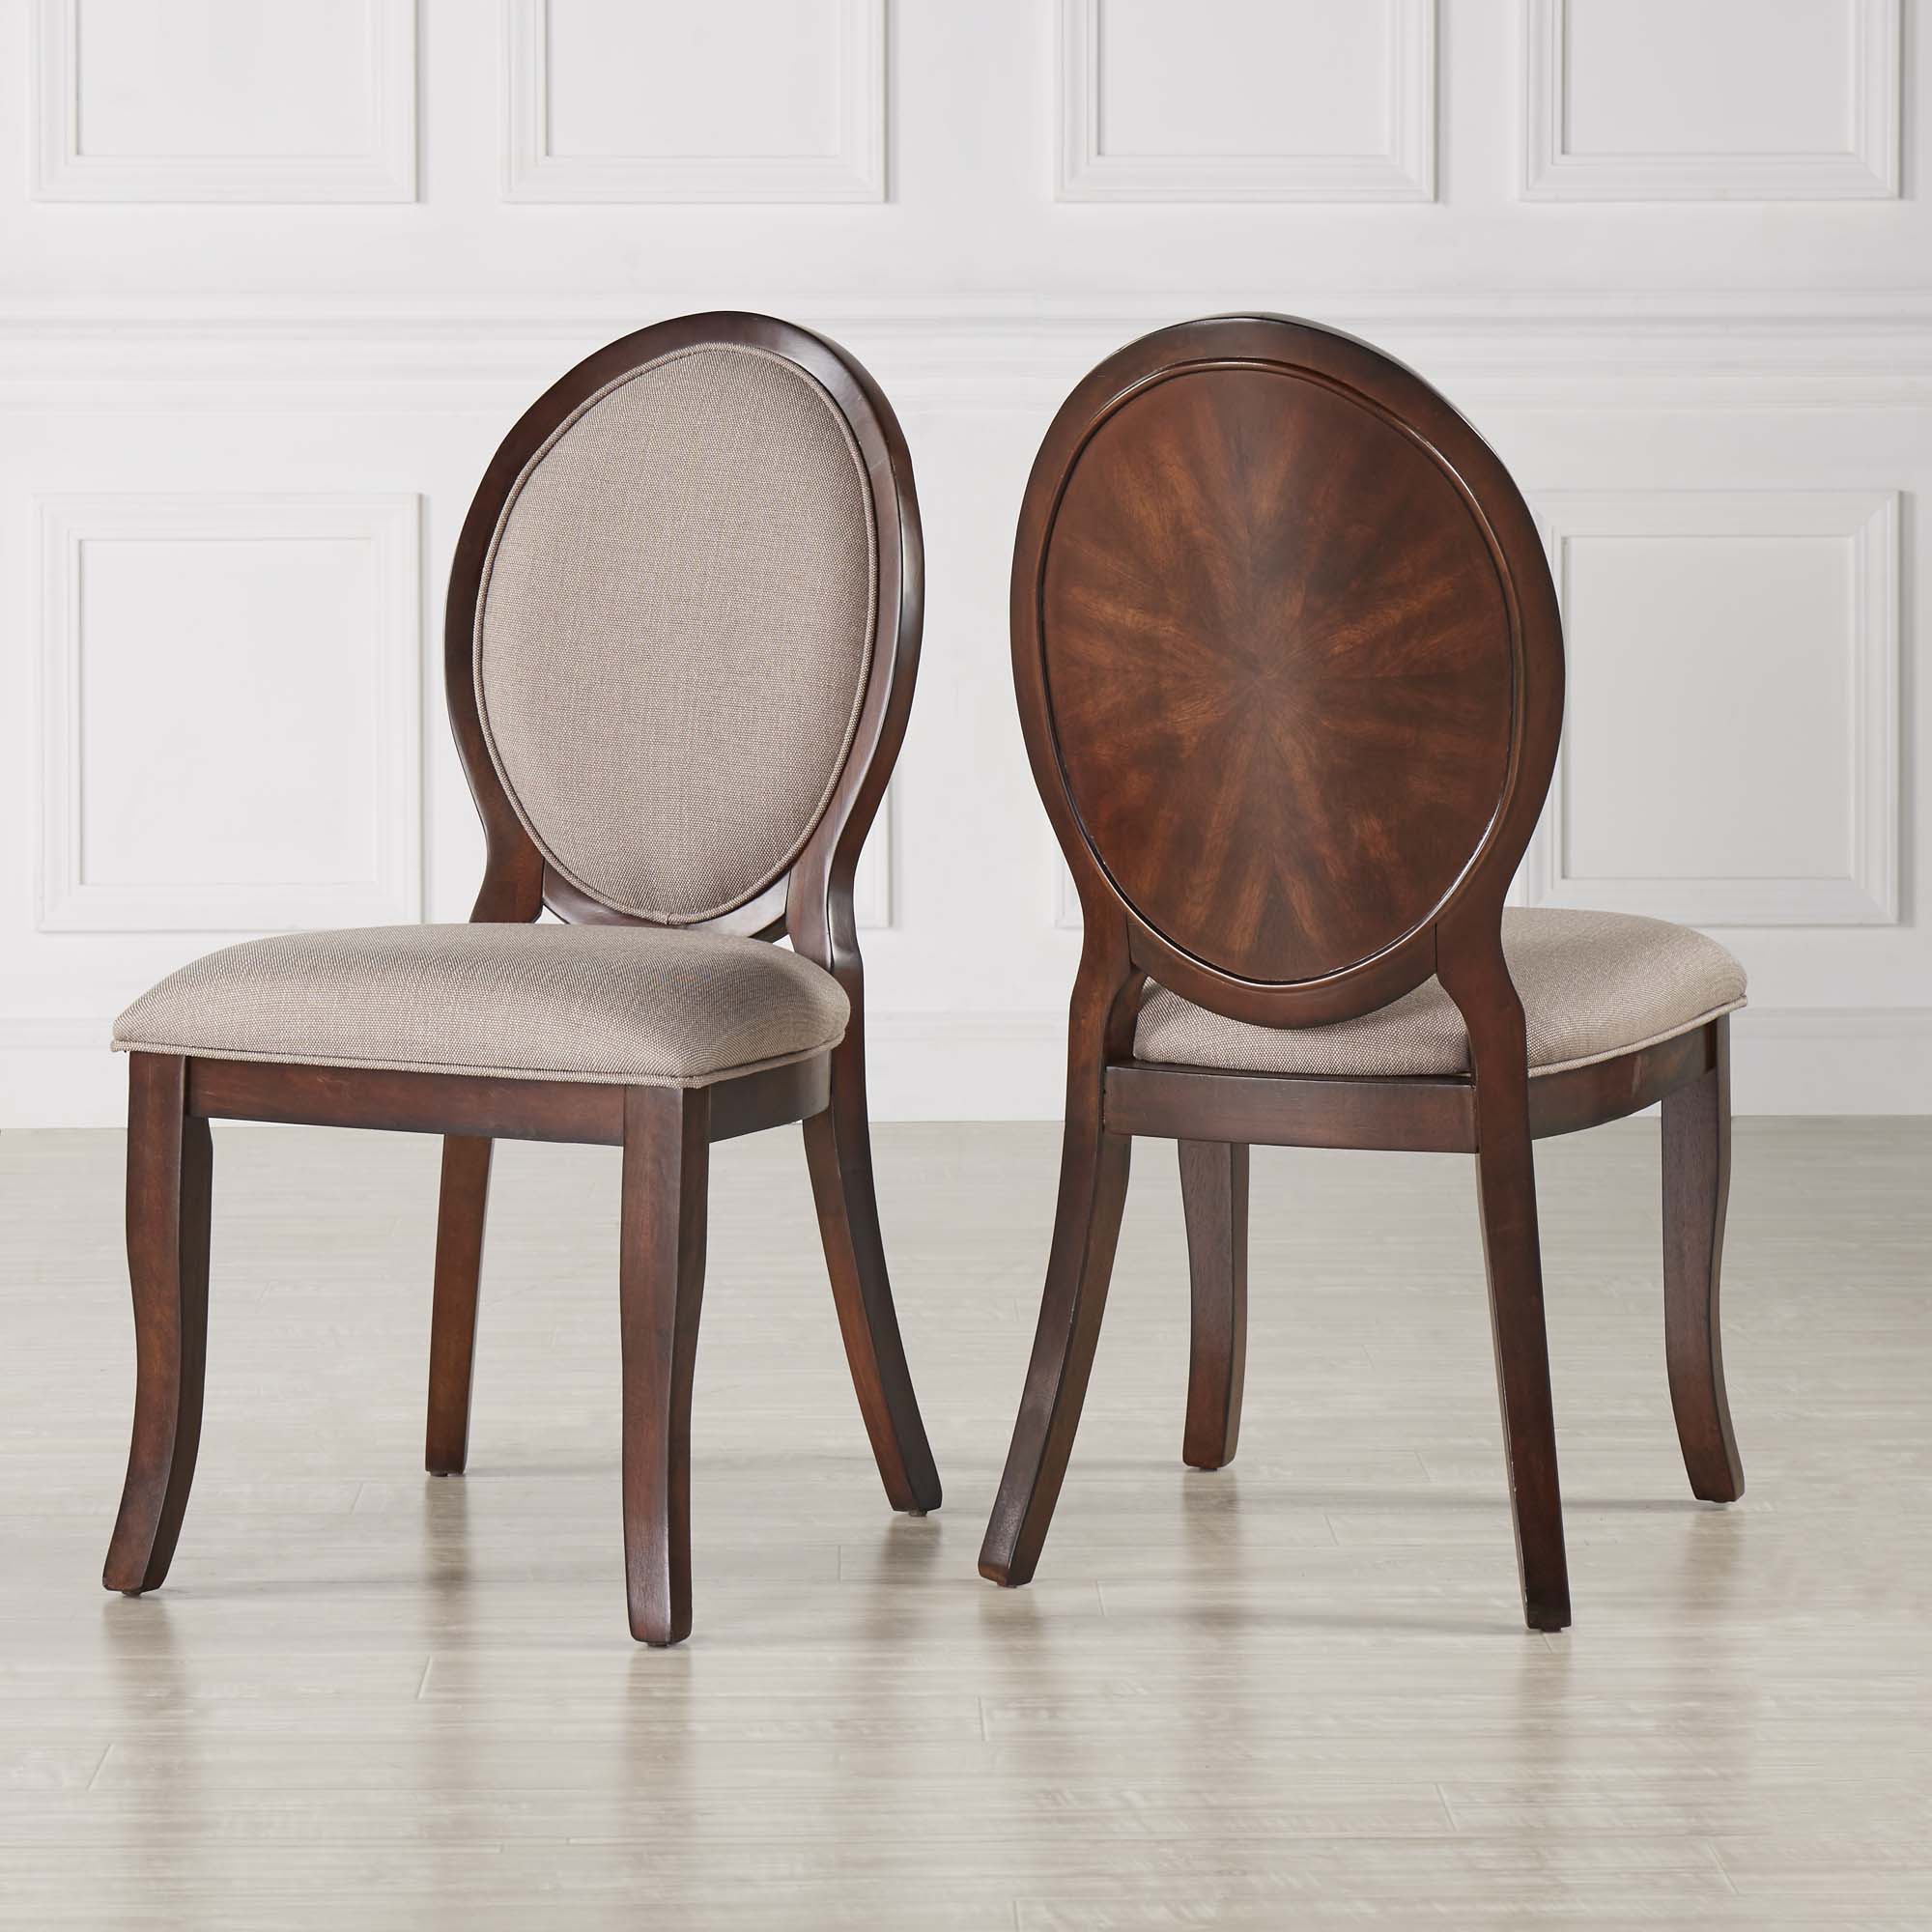 Rich Brown Cherry Finish Oval Dining Chairs (Set of 2)